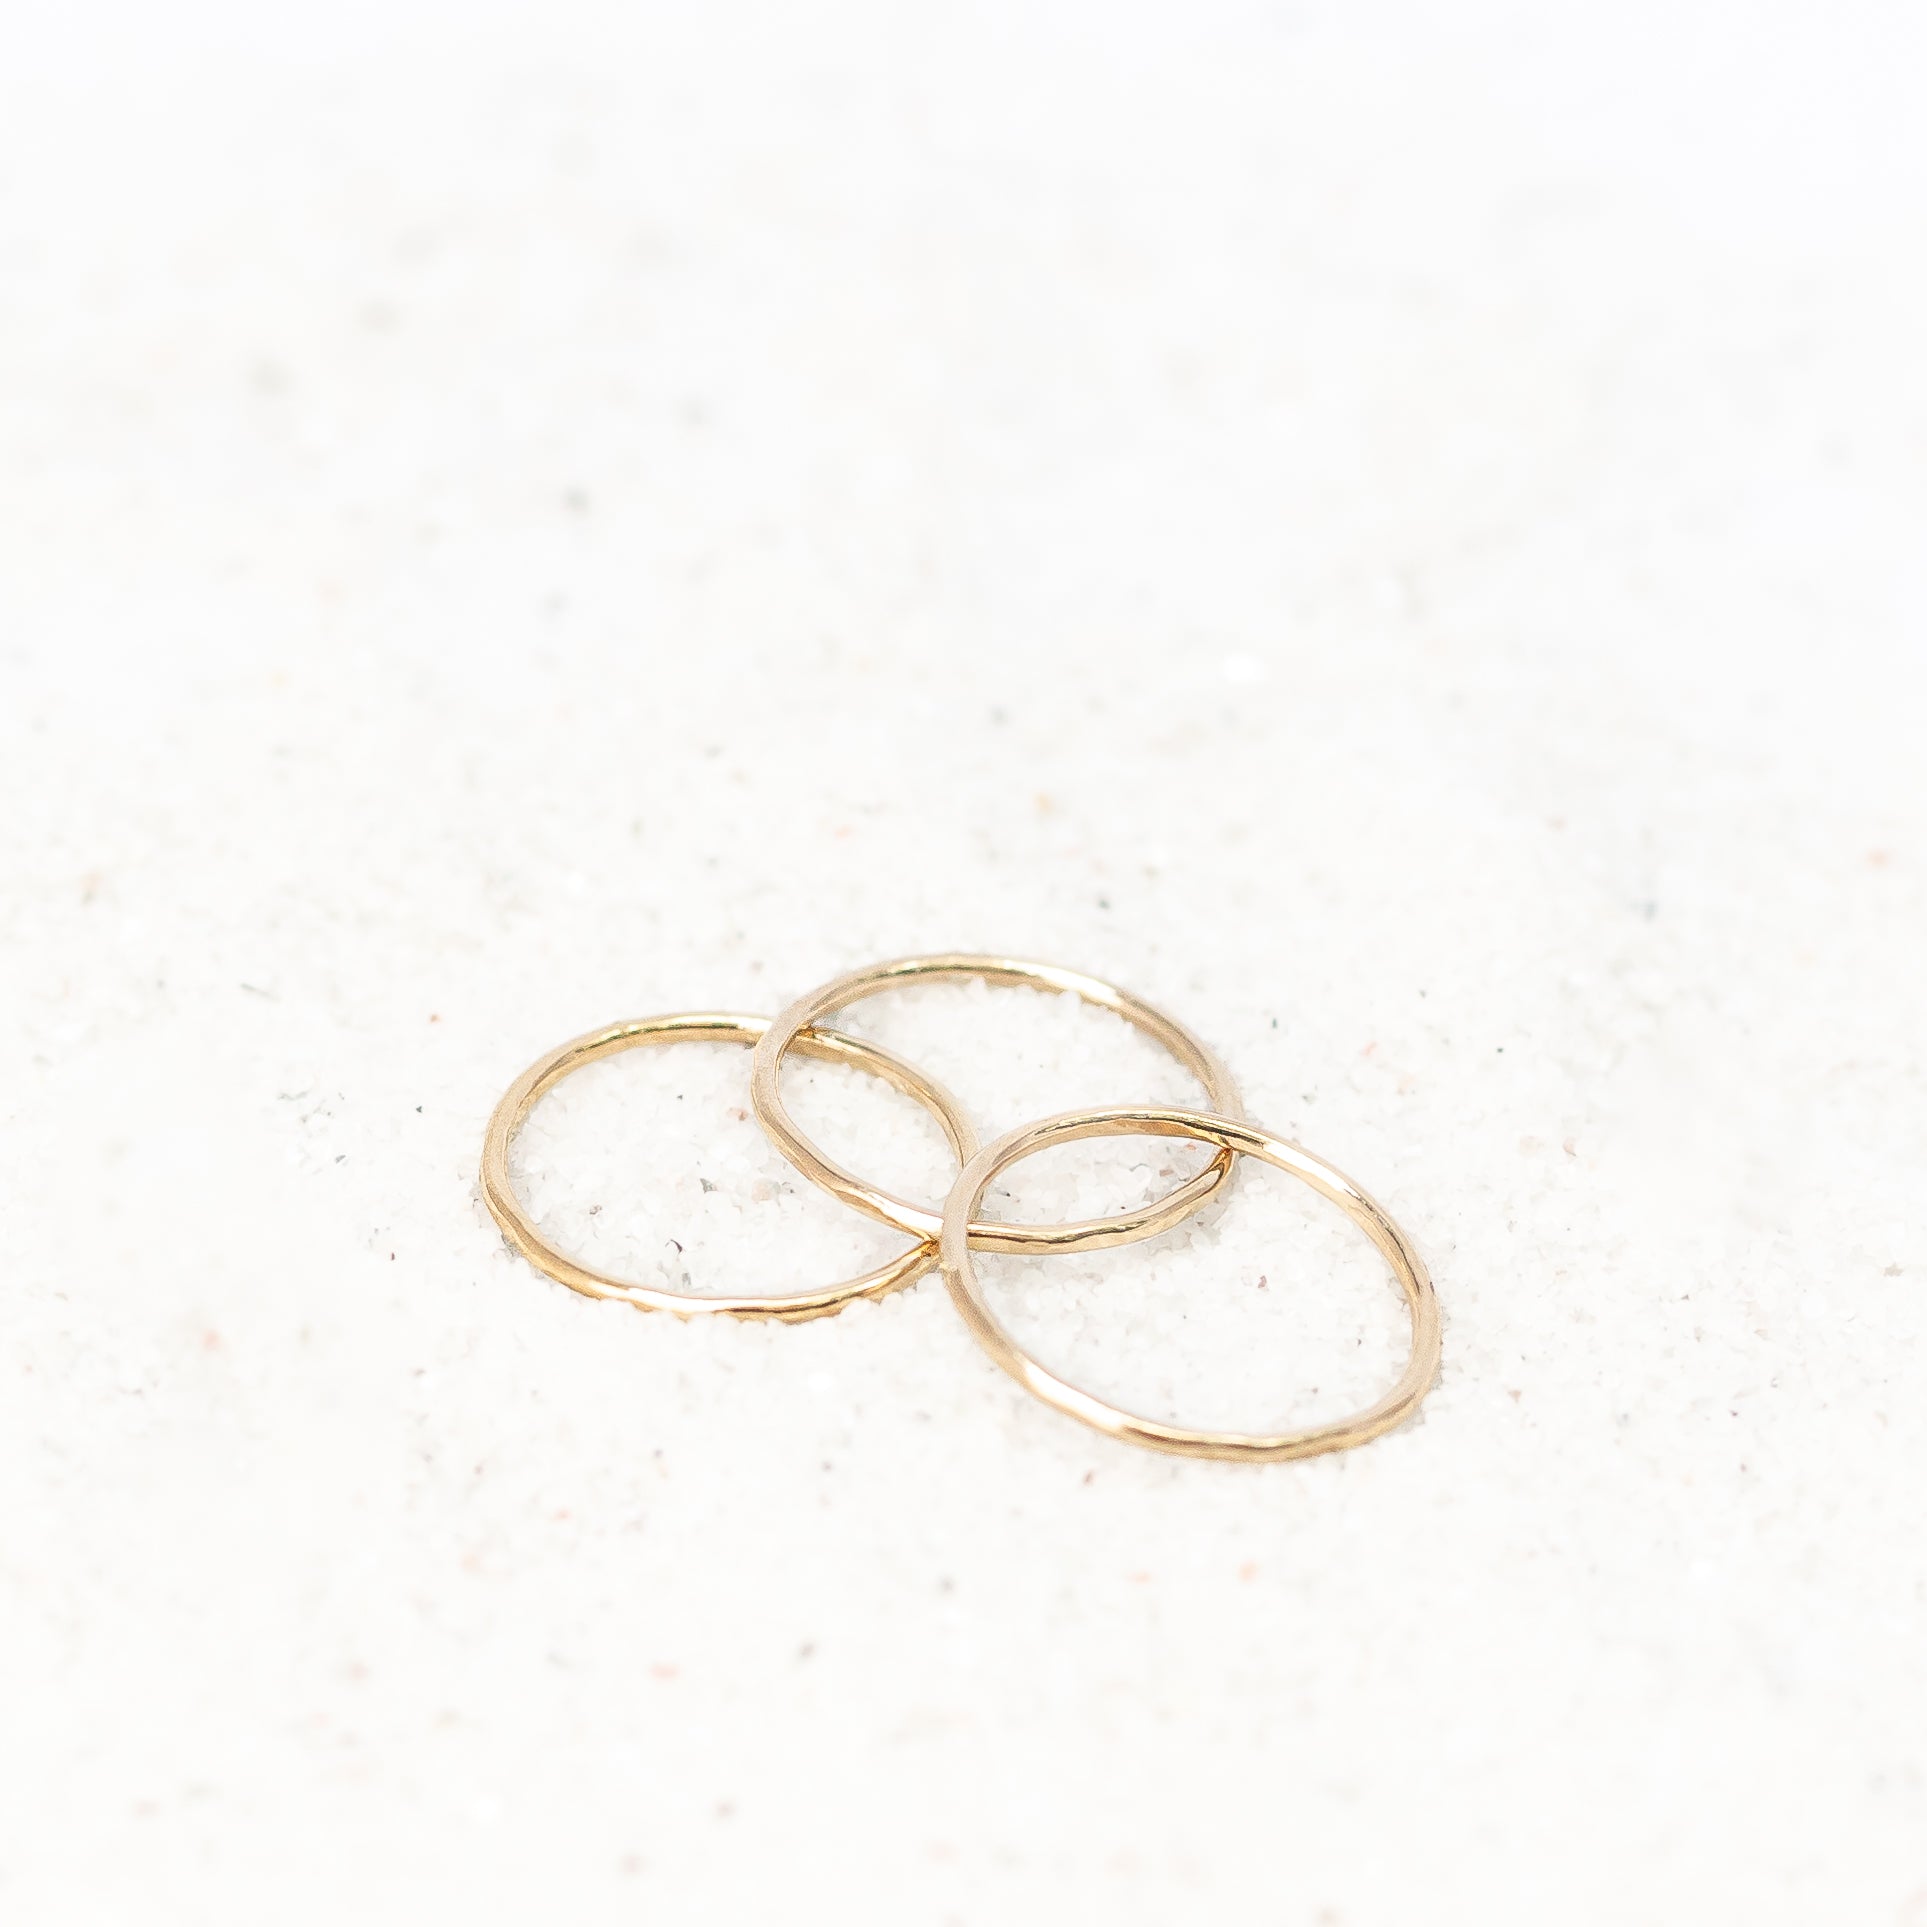 Thin gold filled ring. Three shown. 